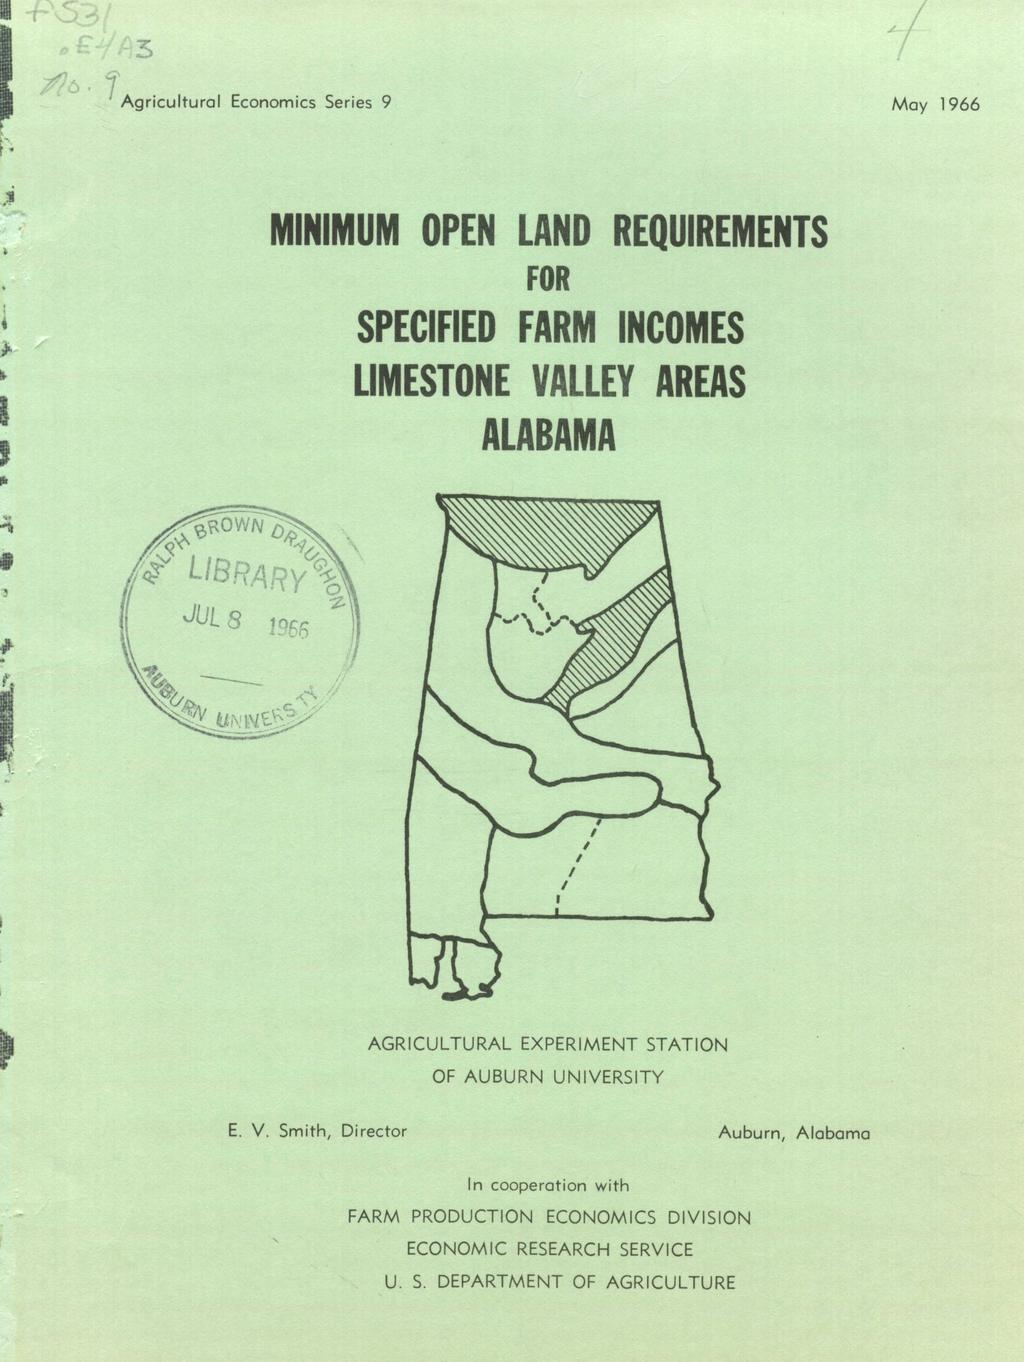 Agricultural Economics Series 9 May 1966 MINIMUM OPEN LAND REQUIREMENTS FOR SPECIFIED FARM INCOMES LIMESTONE VALLEY AREAS ALABAMA l't' ti i, s '" ' ', JUL 1t 'r,- v,n h AGRICULTURAL